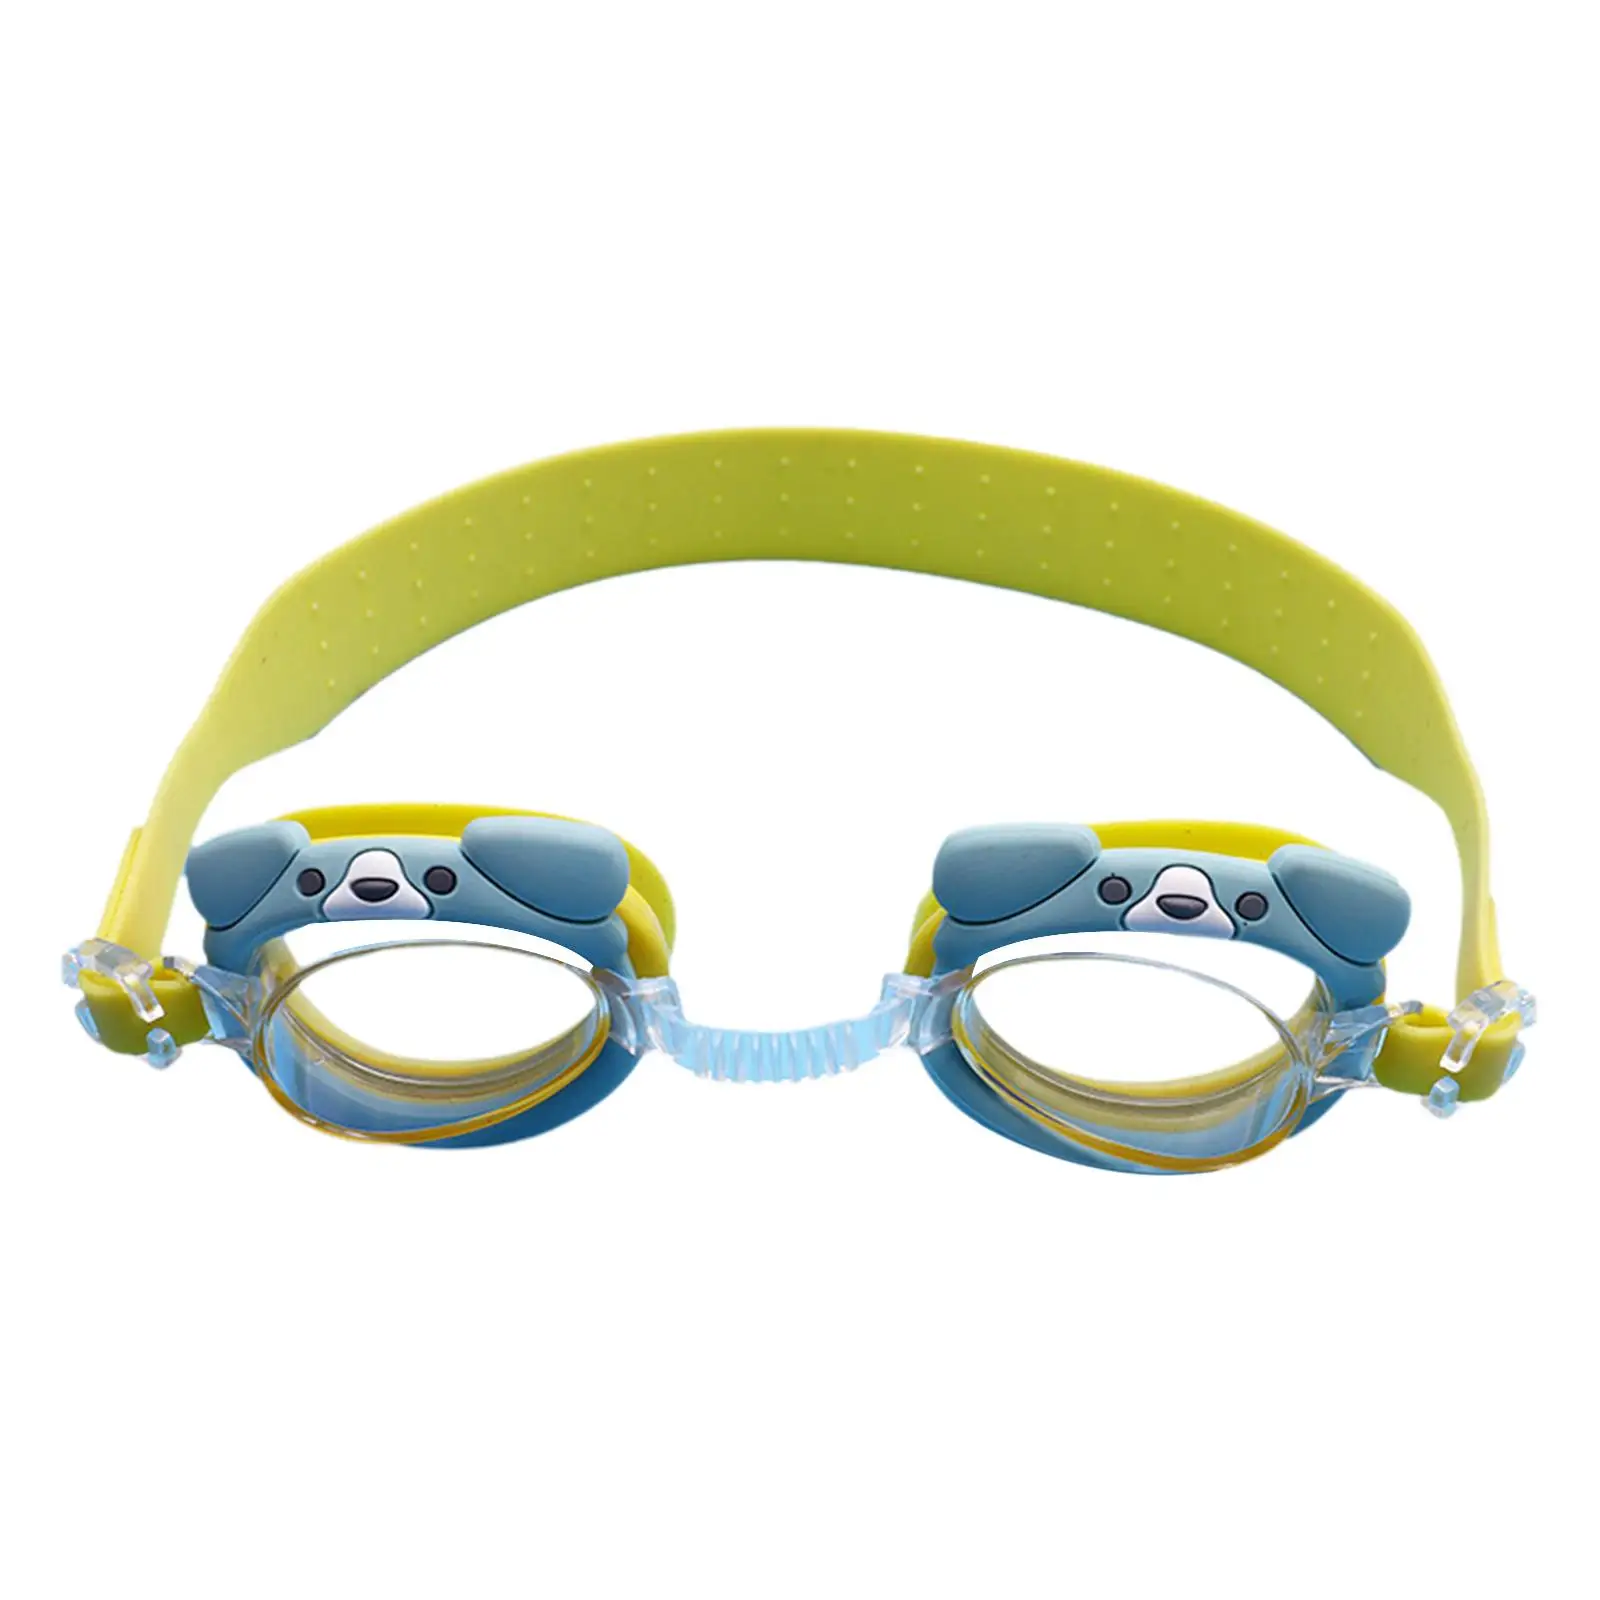 Carton Swimming Goggles Professional Clear View Swimming Glasses Swim Goggles for Kids for Child 2-12 Years Old Boys Girls Teens